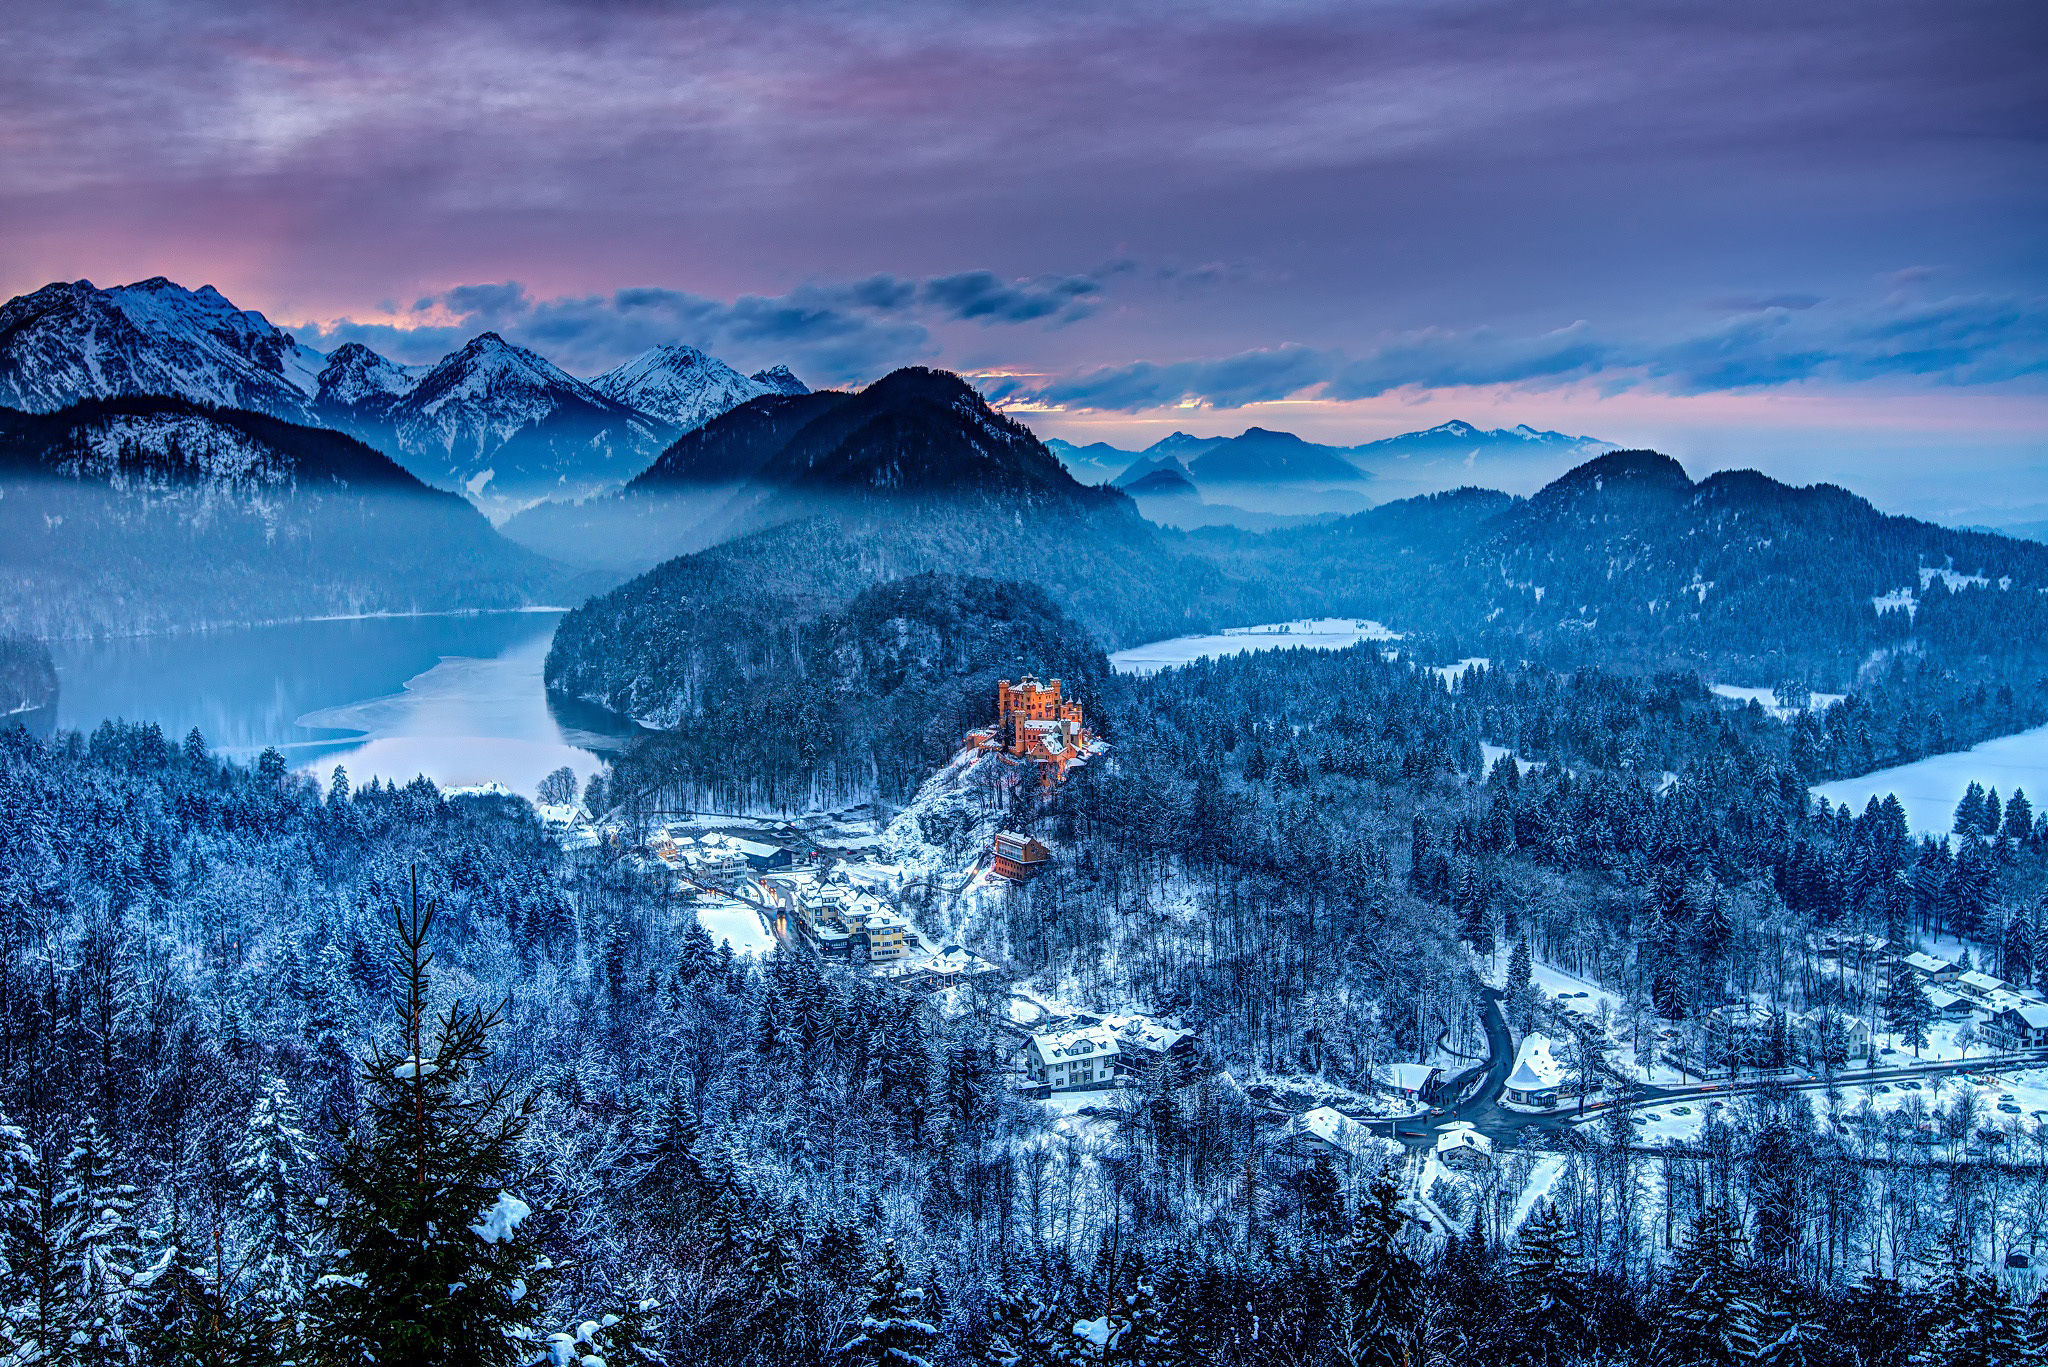 69606 download wallpaper mountains, winter, nature, germany, hohenschwangau castle, hoenshwangau castle, southern bavaria, south bavaria screensavers and pictures for free